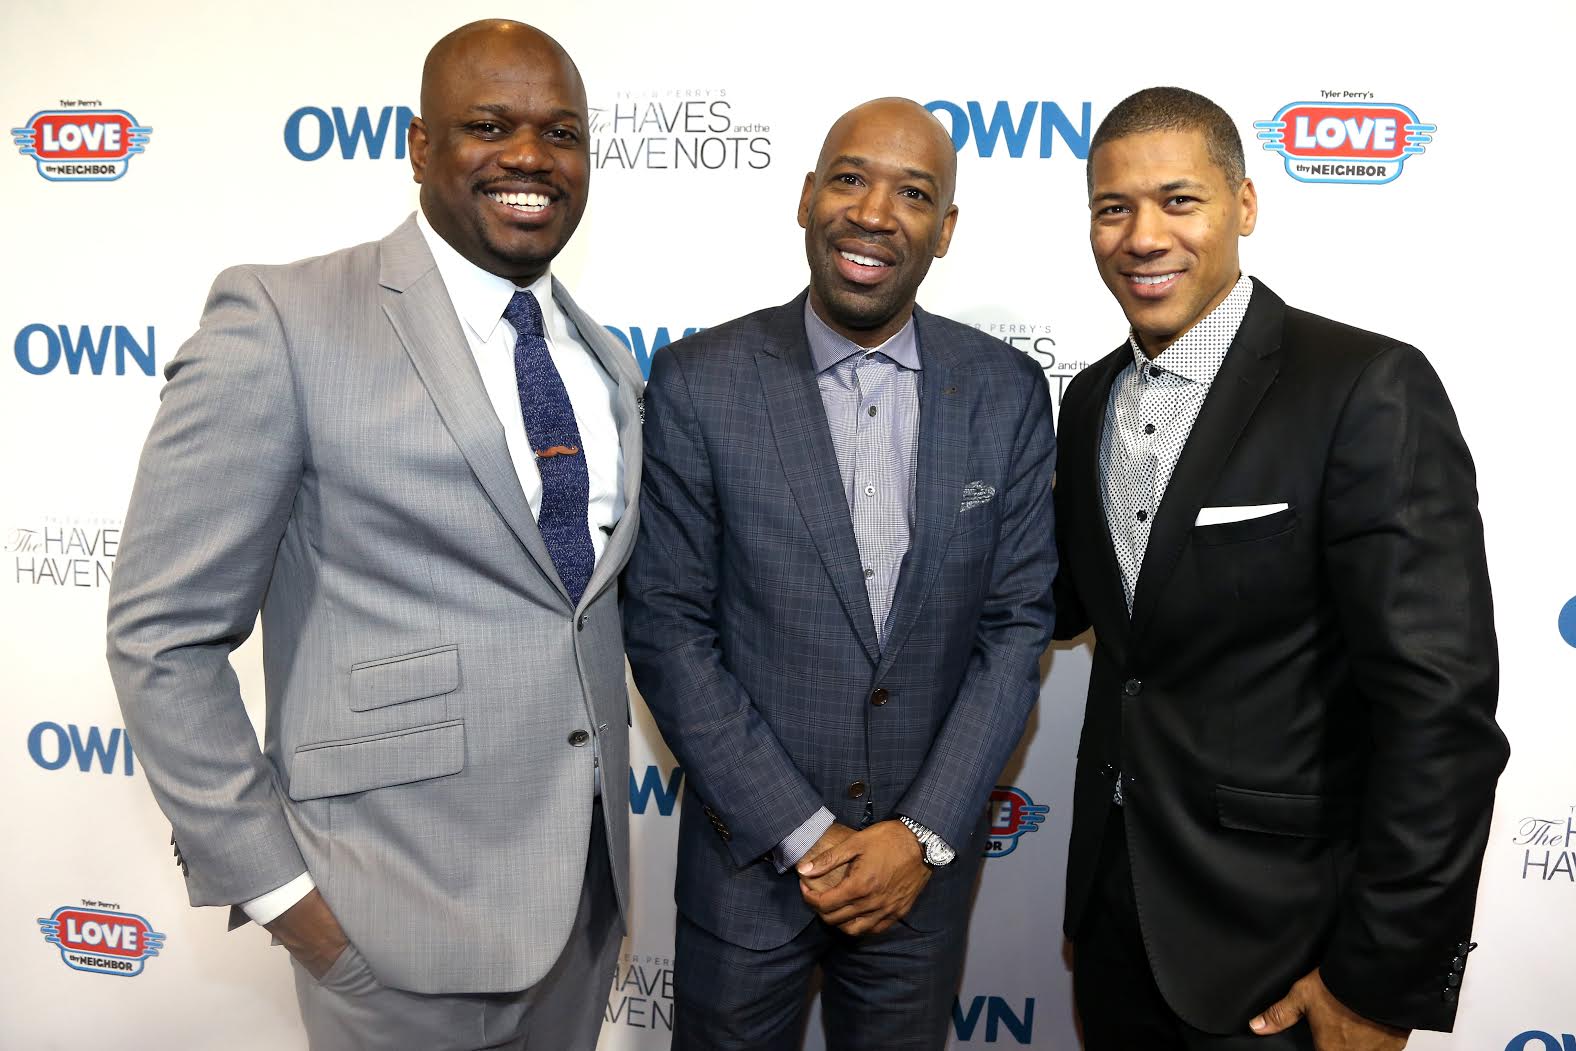 NEW YORK, NY - JANUARY 08: (L-R): Khalil Hasan, J. Alexander Martin and Shannon Lanier attend the OWN Press Lunch with Tyler Perry and the casts of "The Haves and the Have Nots" and "Love Thy Neighbor" on January 8, 2016 in New York City. (Photo by Johnny Nunez/Getty Images for Oprah Winfrey Network)